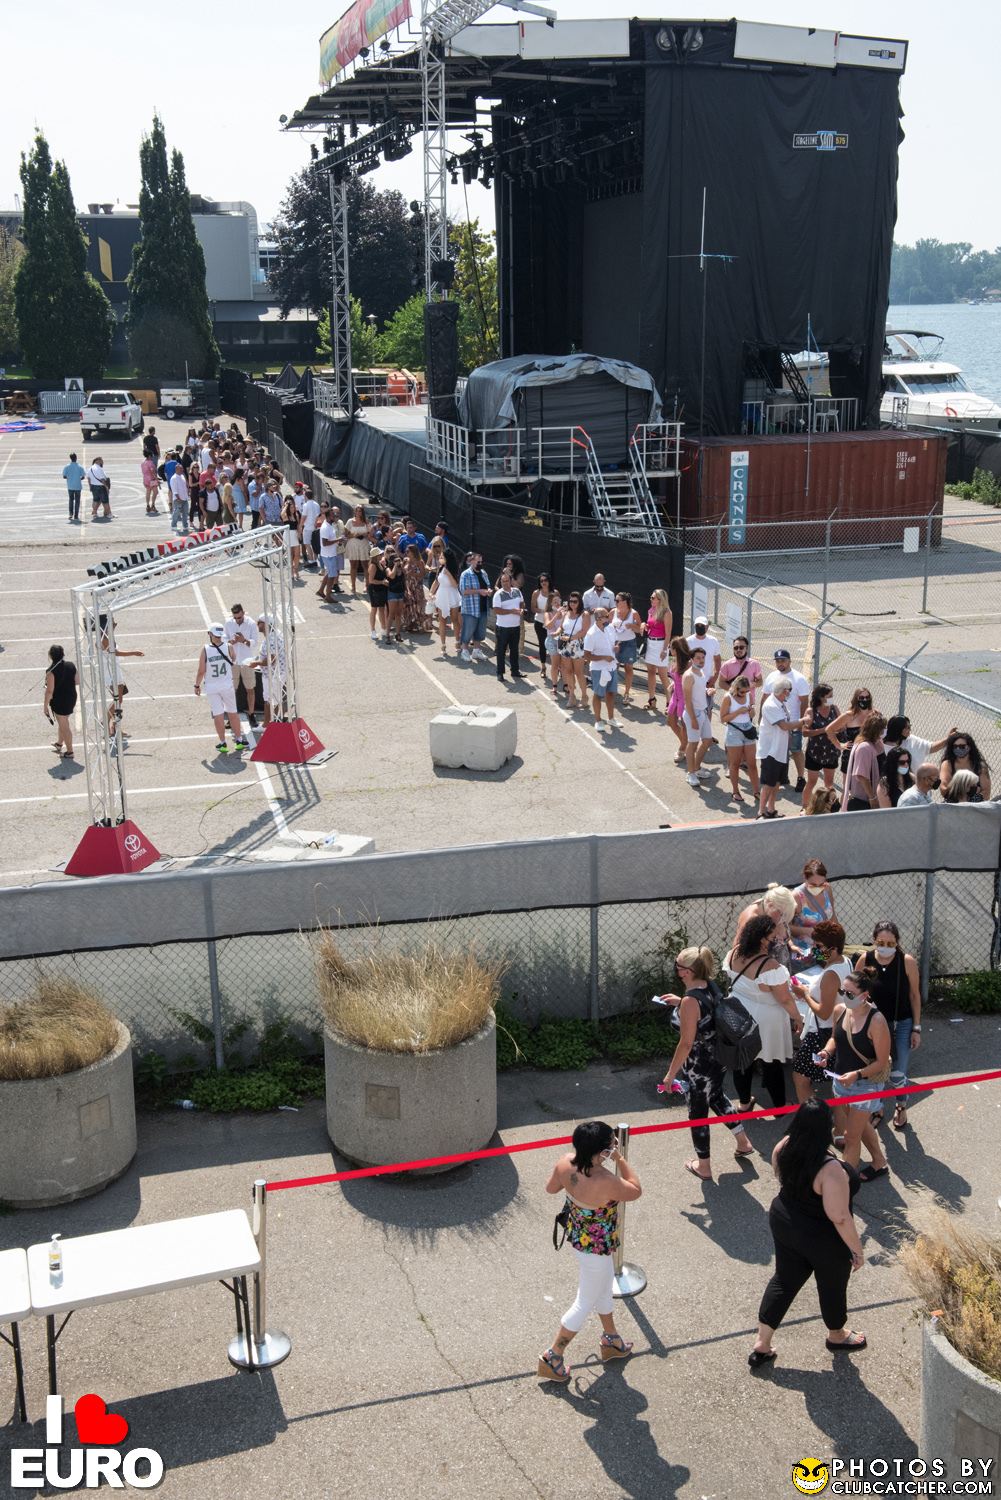 Empress Of Canada party venue photo 172 - August 22nd, 2021